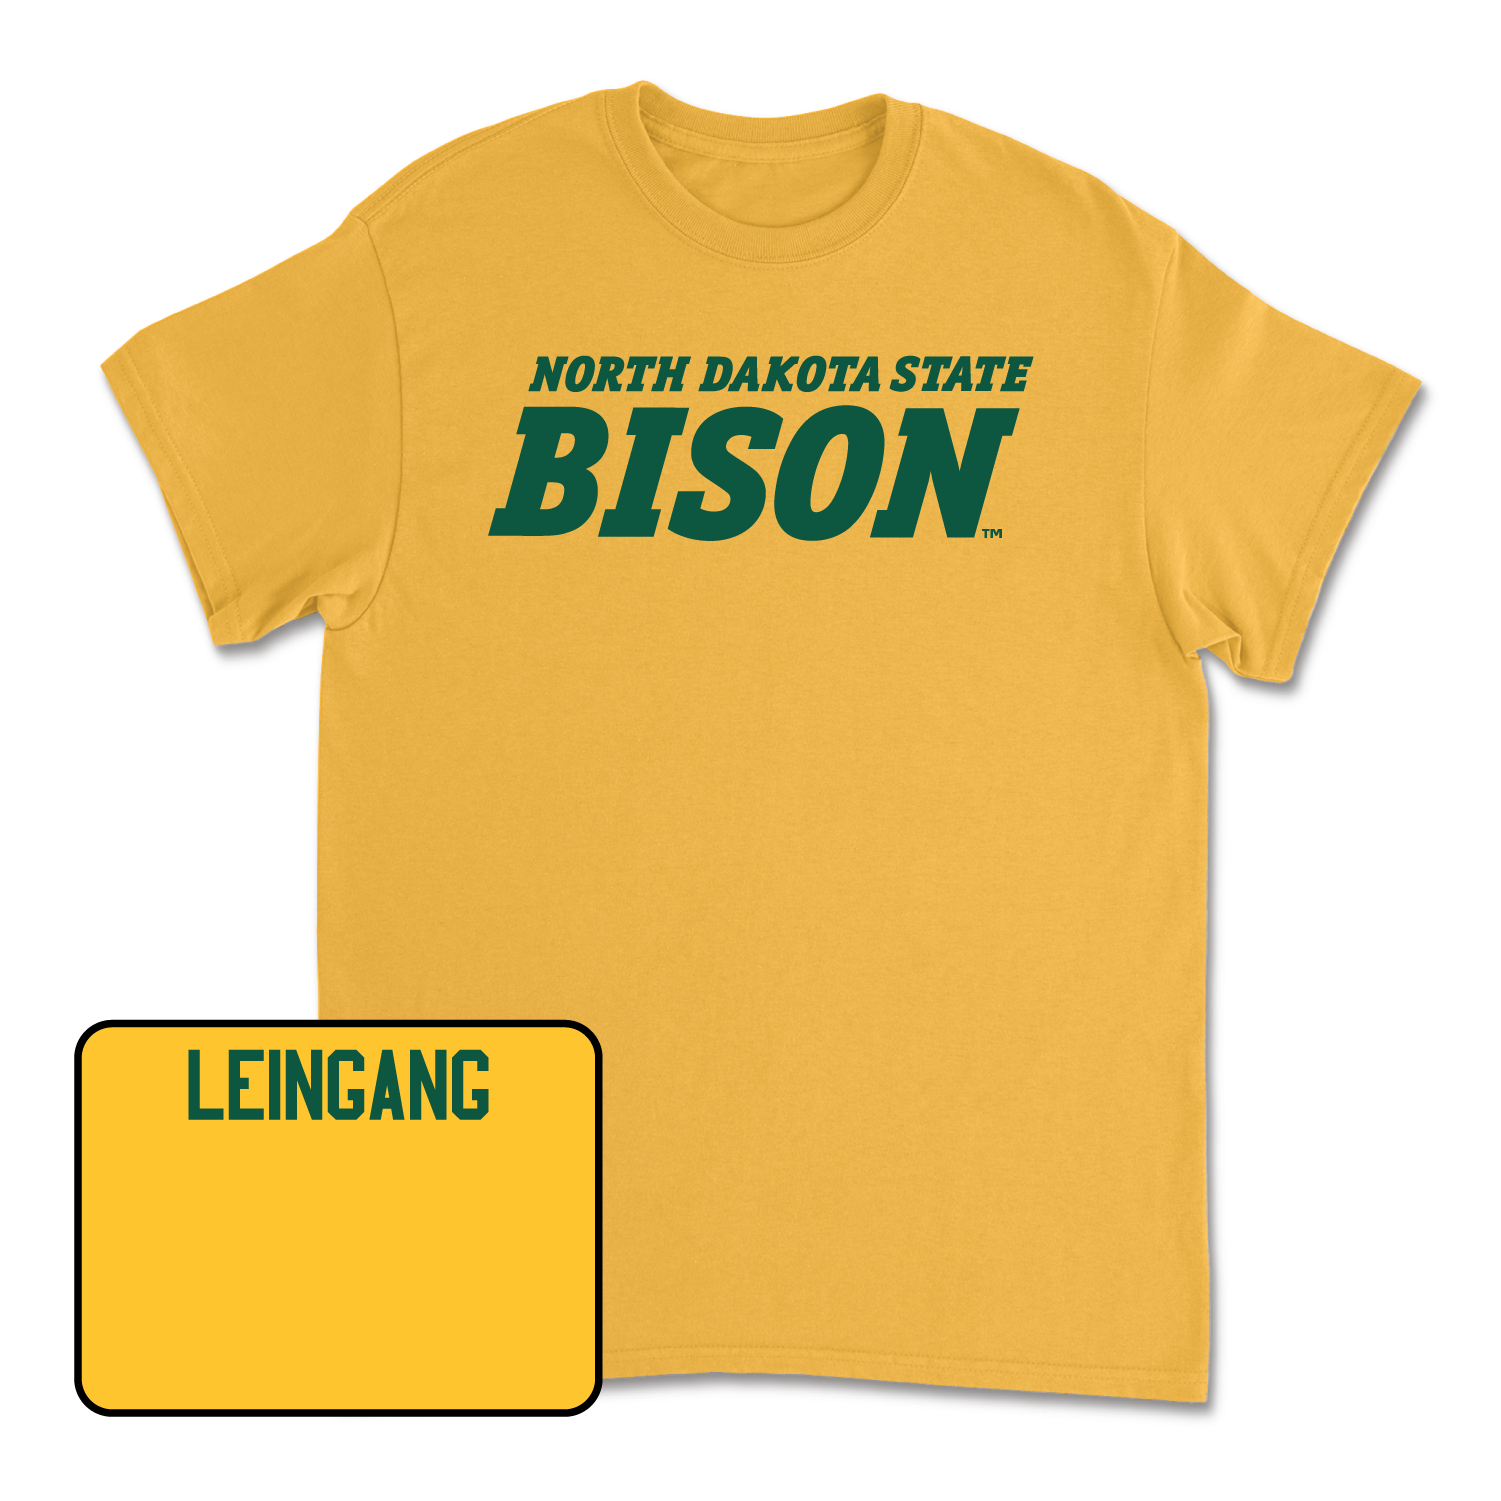 Gold Track & Field Bison Tee 2 Large / Taylor Leingang